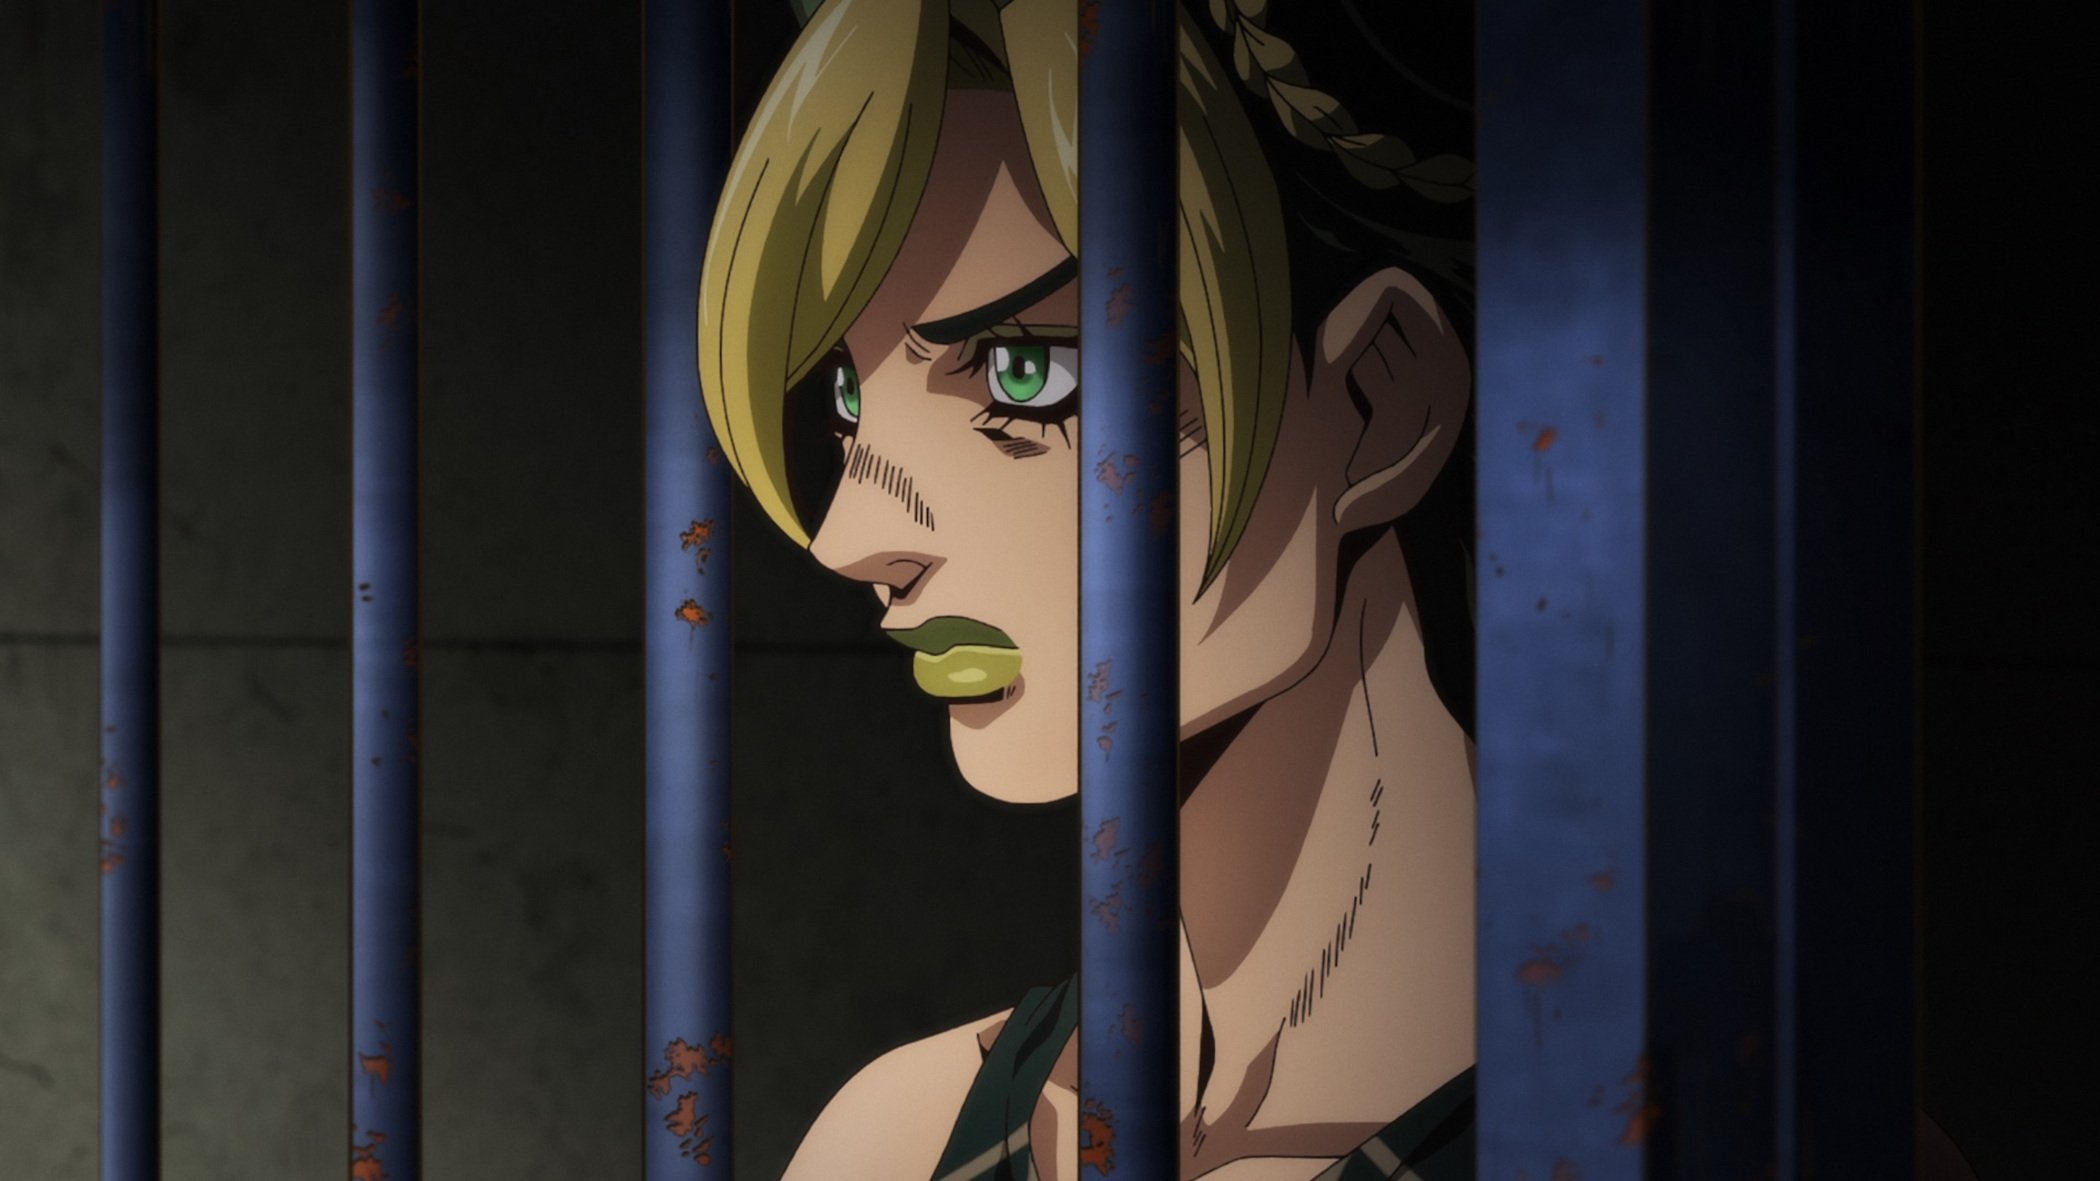 Jolyne Cujoh in 'JoJo's Bizarre Adventure: Stone Ocean,' which has a part 2 release date scheduled for September.